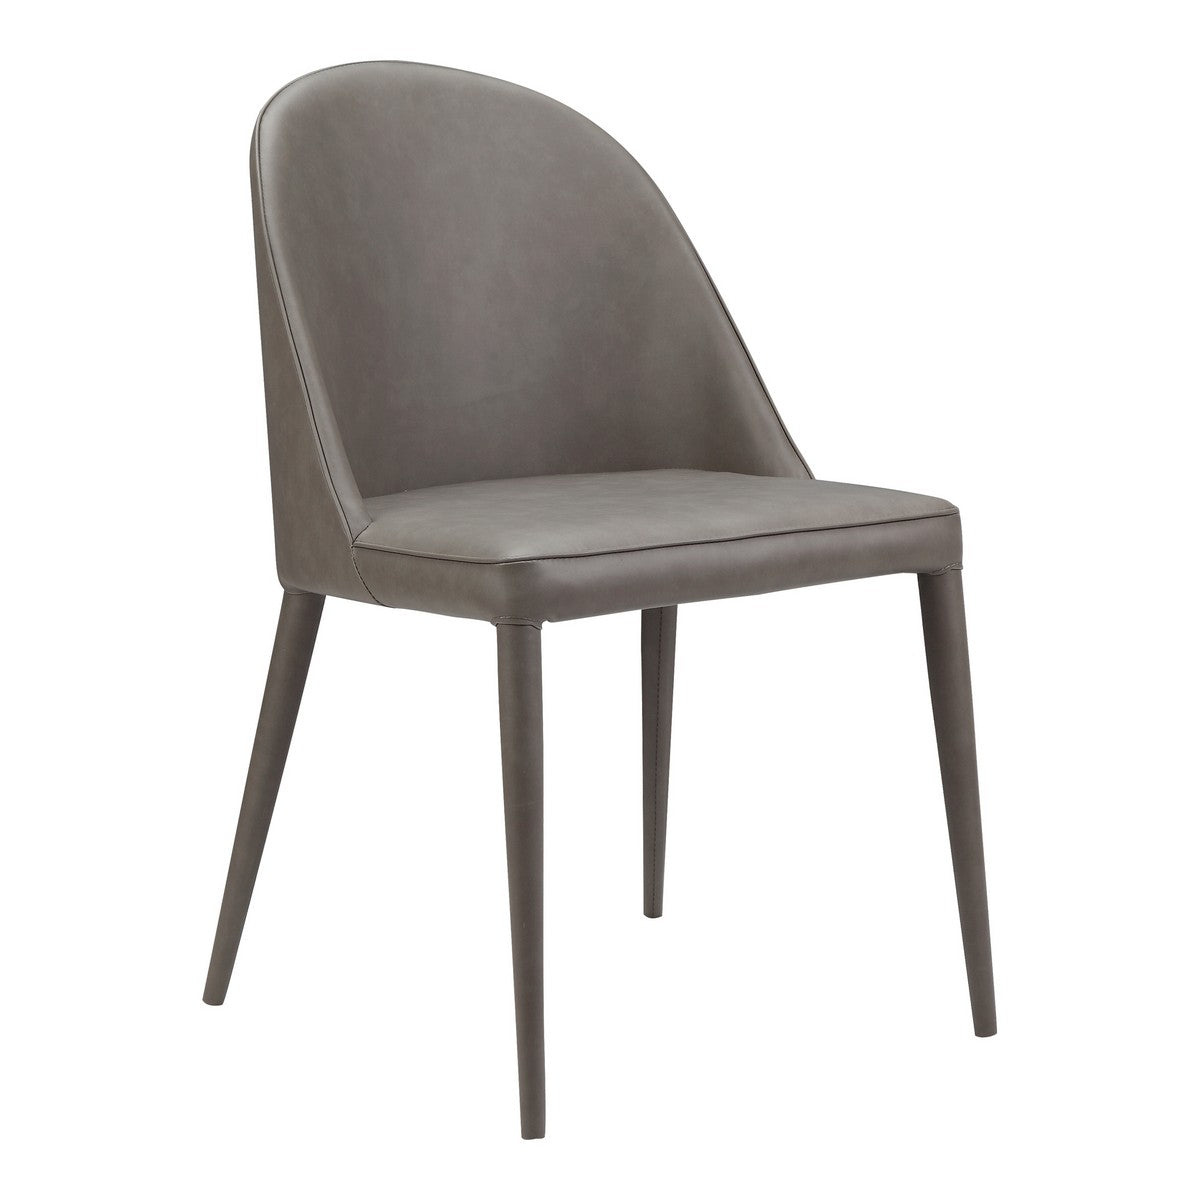 Moe's Home Collection Burton Pu Dining Chair Grey -Set of Two - YM-1002-26